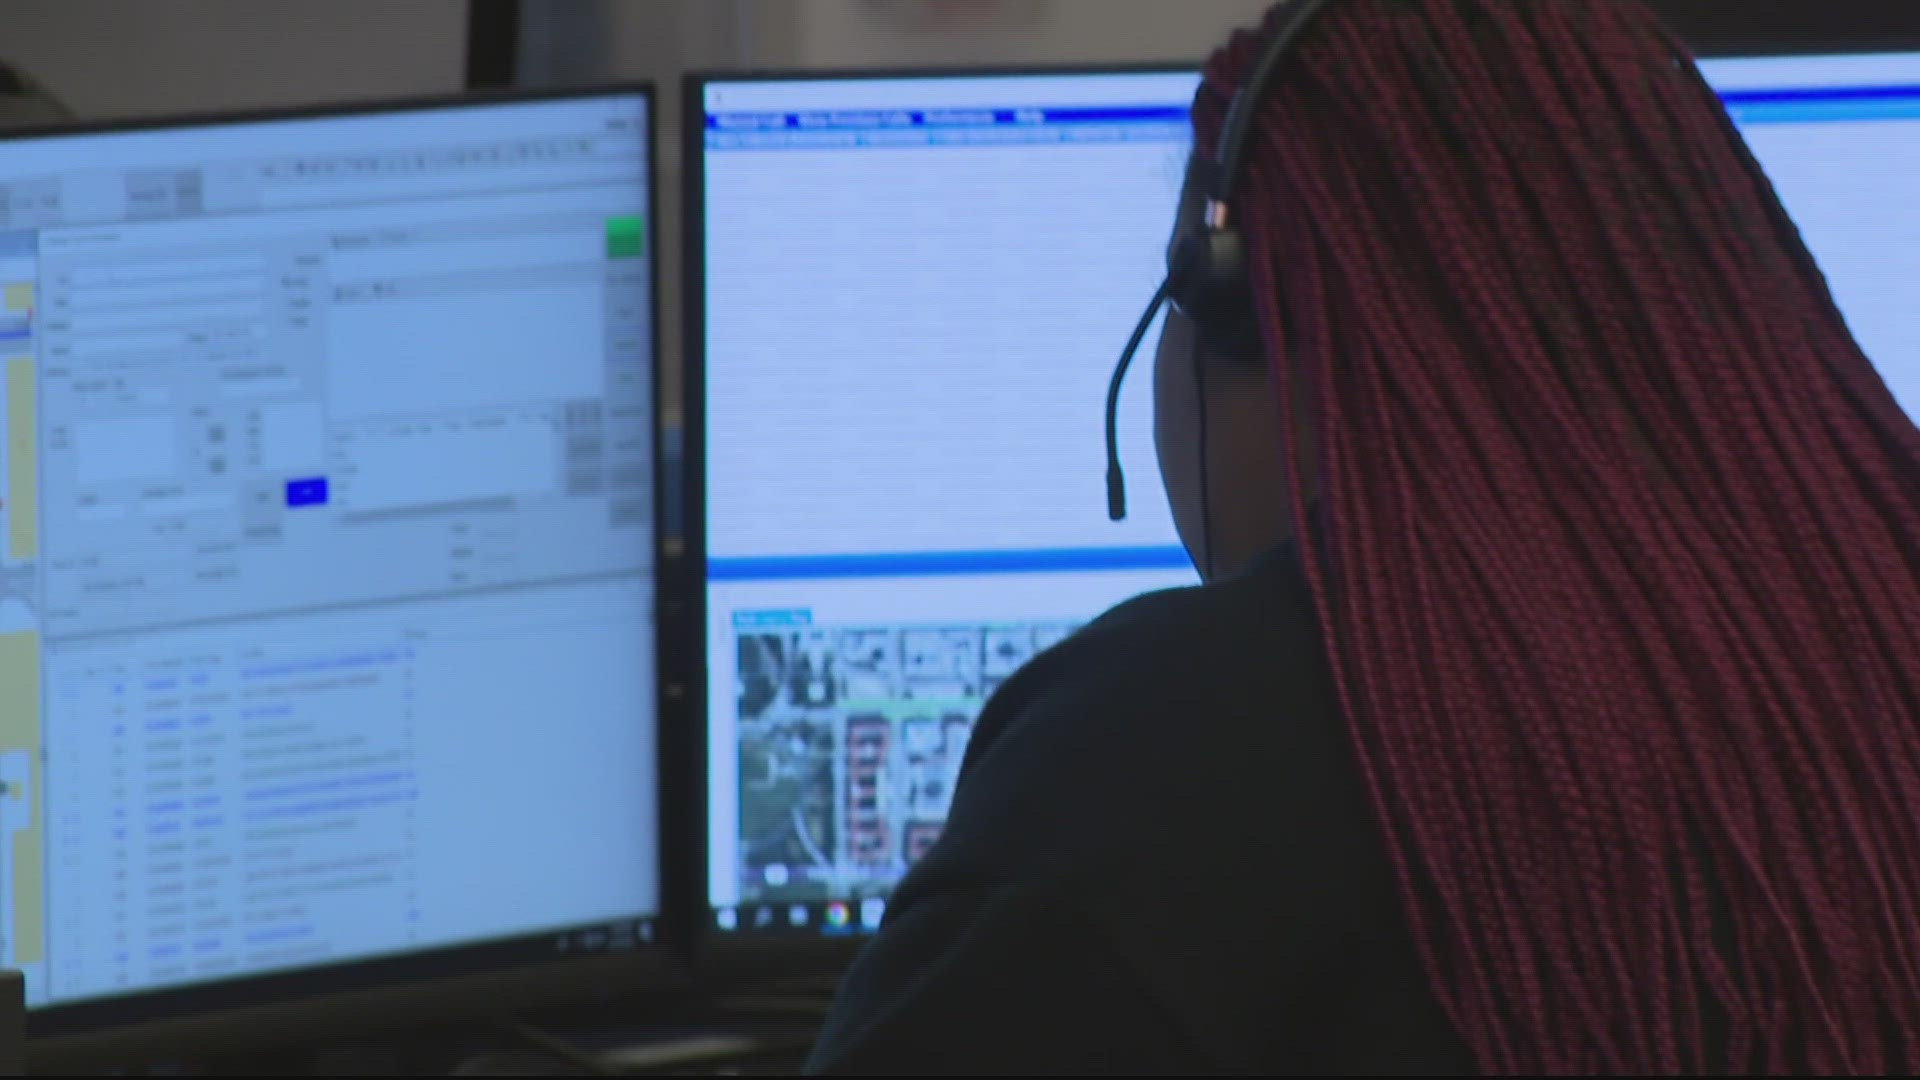 DC's 911 call center is facing a lot of criticism of late.